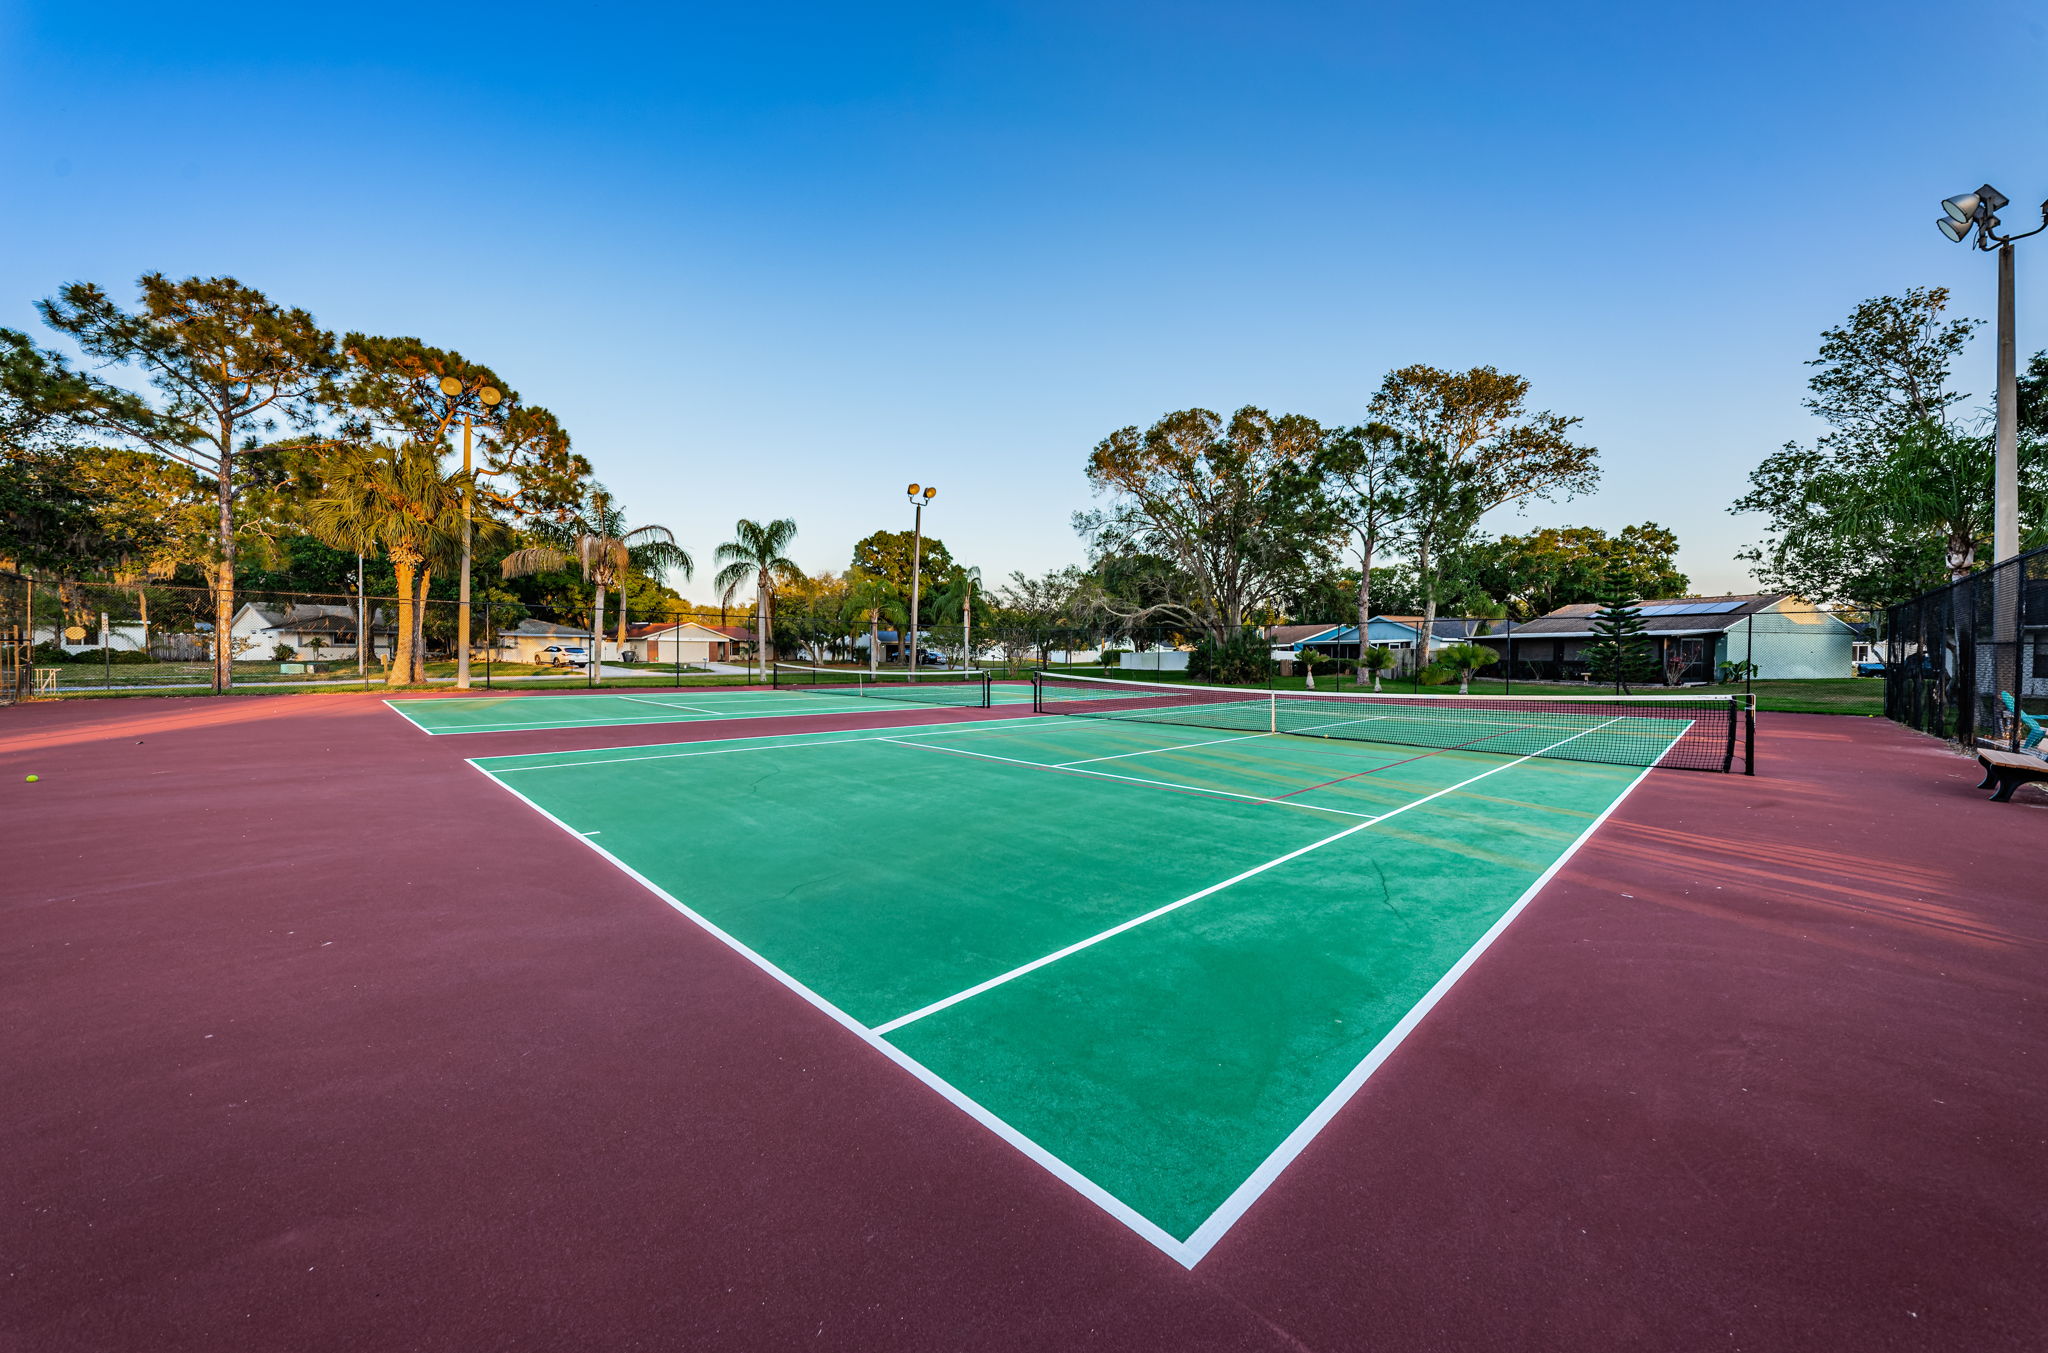 10-Tennis and Pickleball Courts